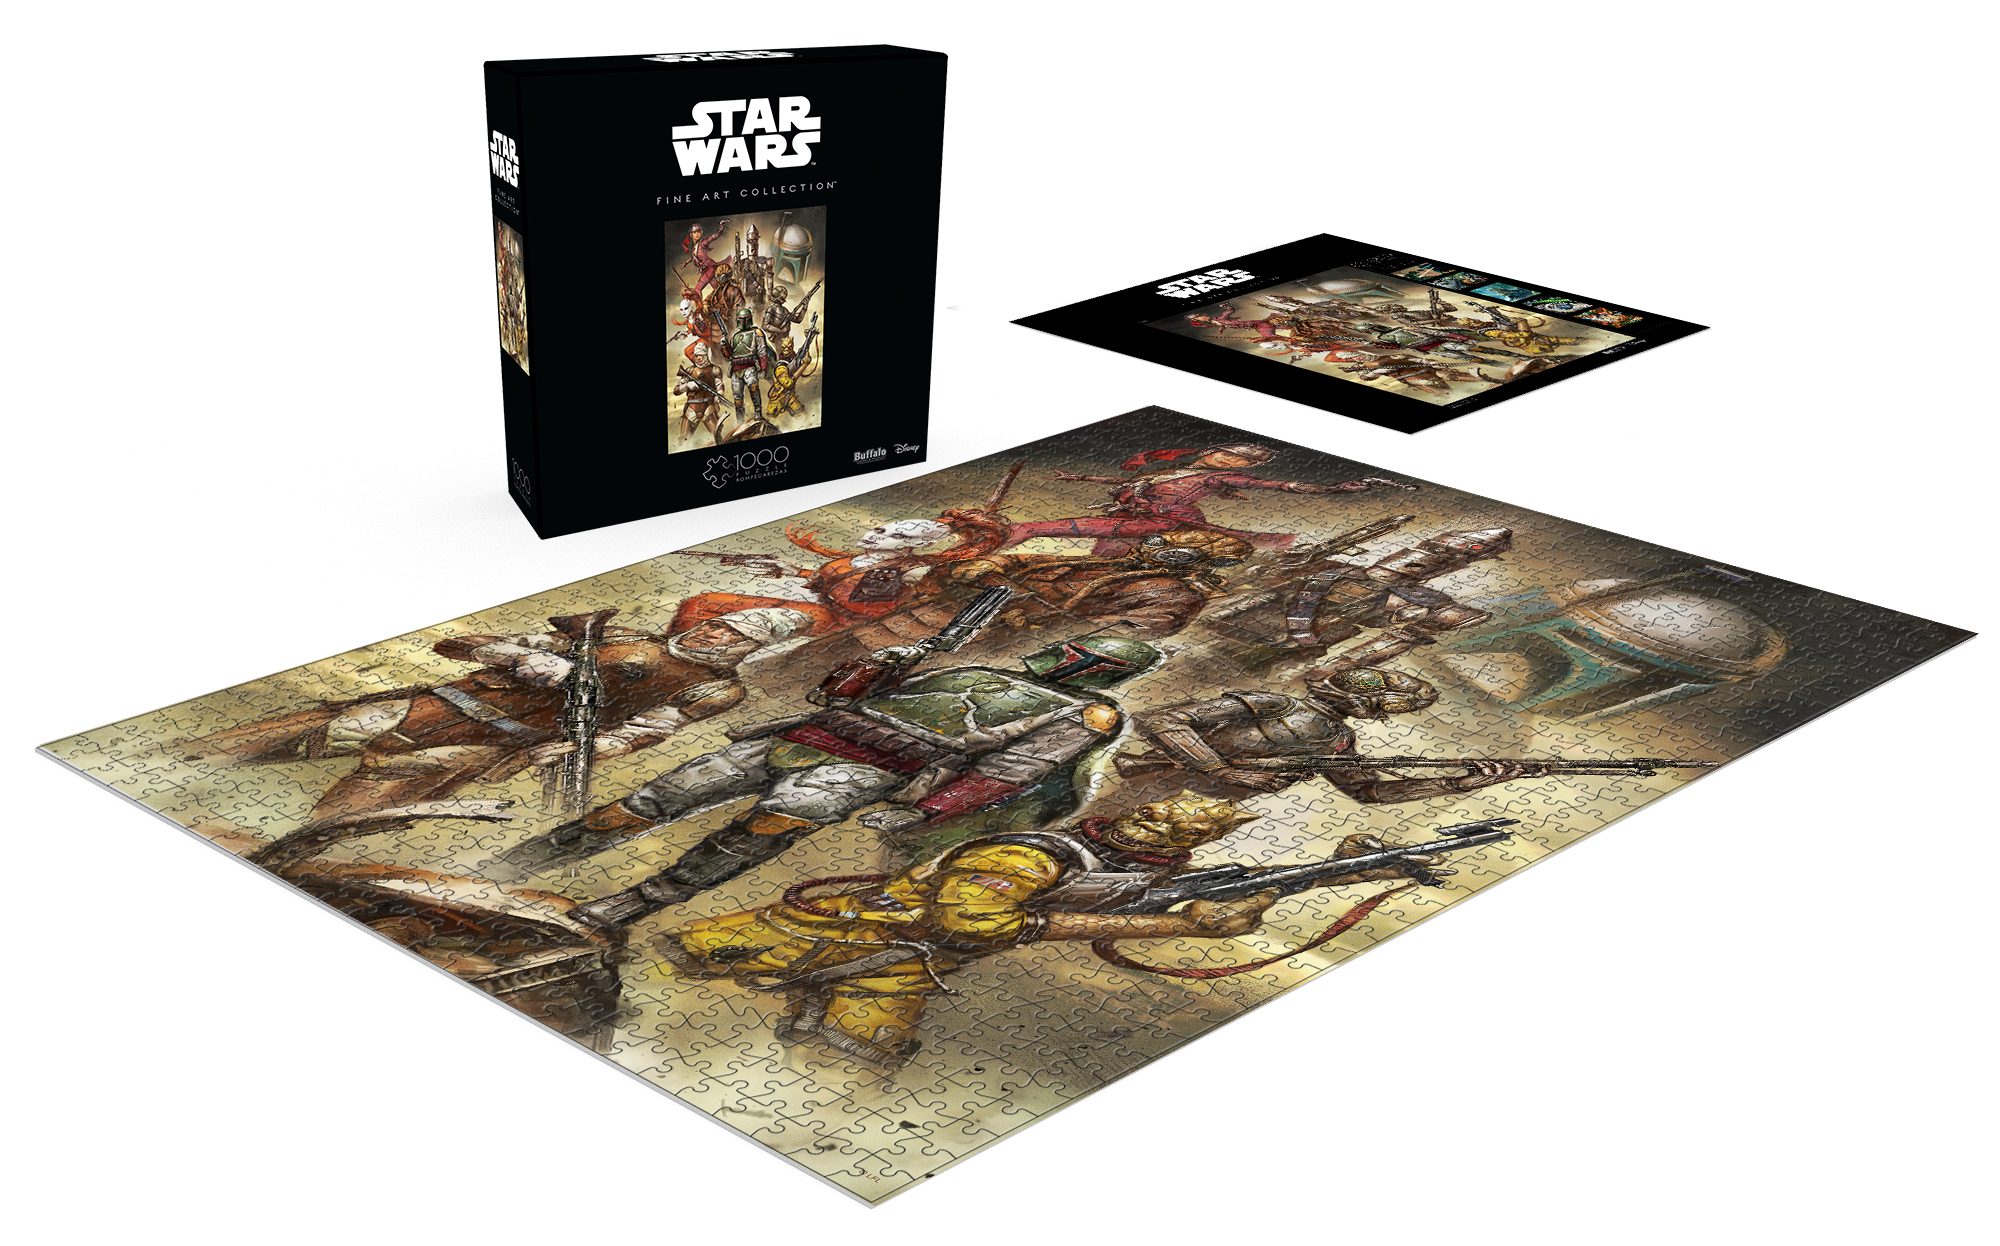 Star Wars 1000 Piece Fine Art Collection Puzzle - image 3 of 5